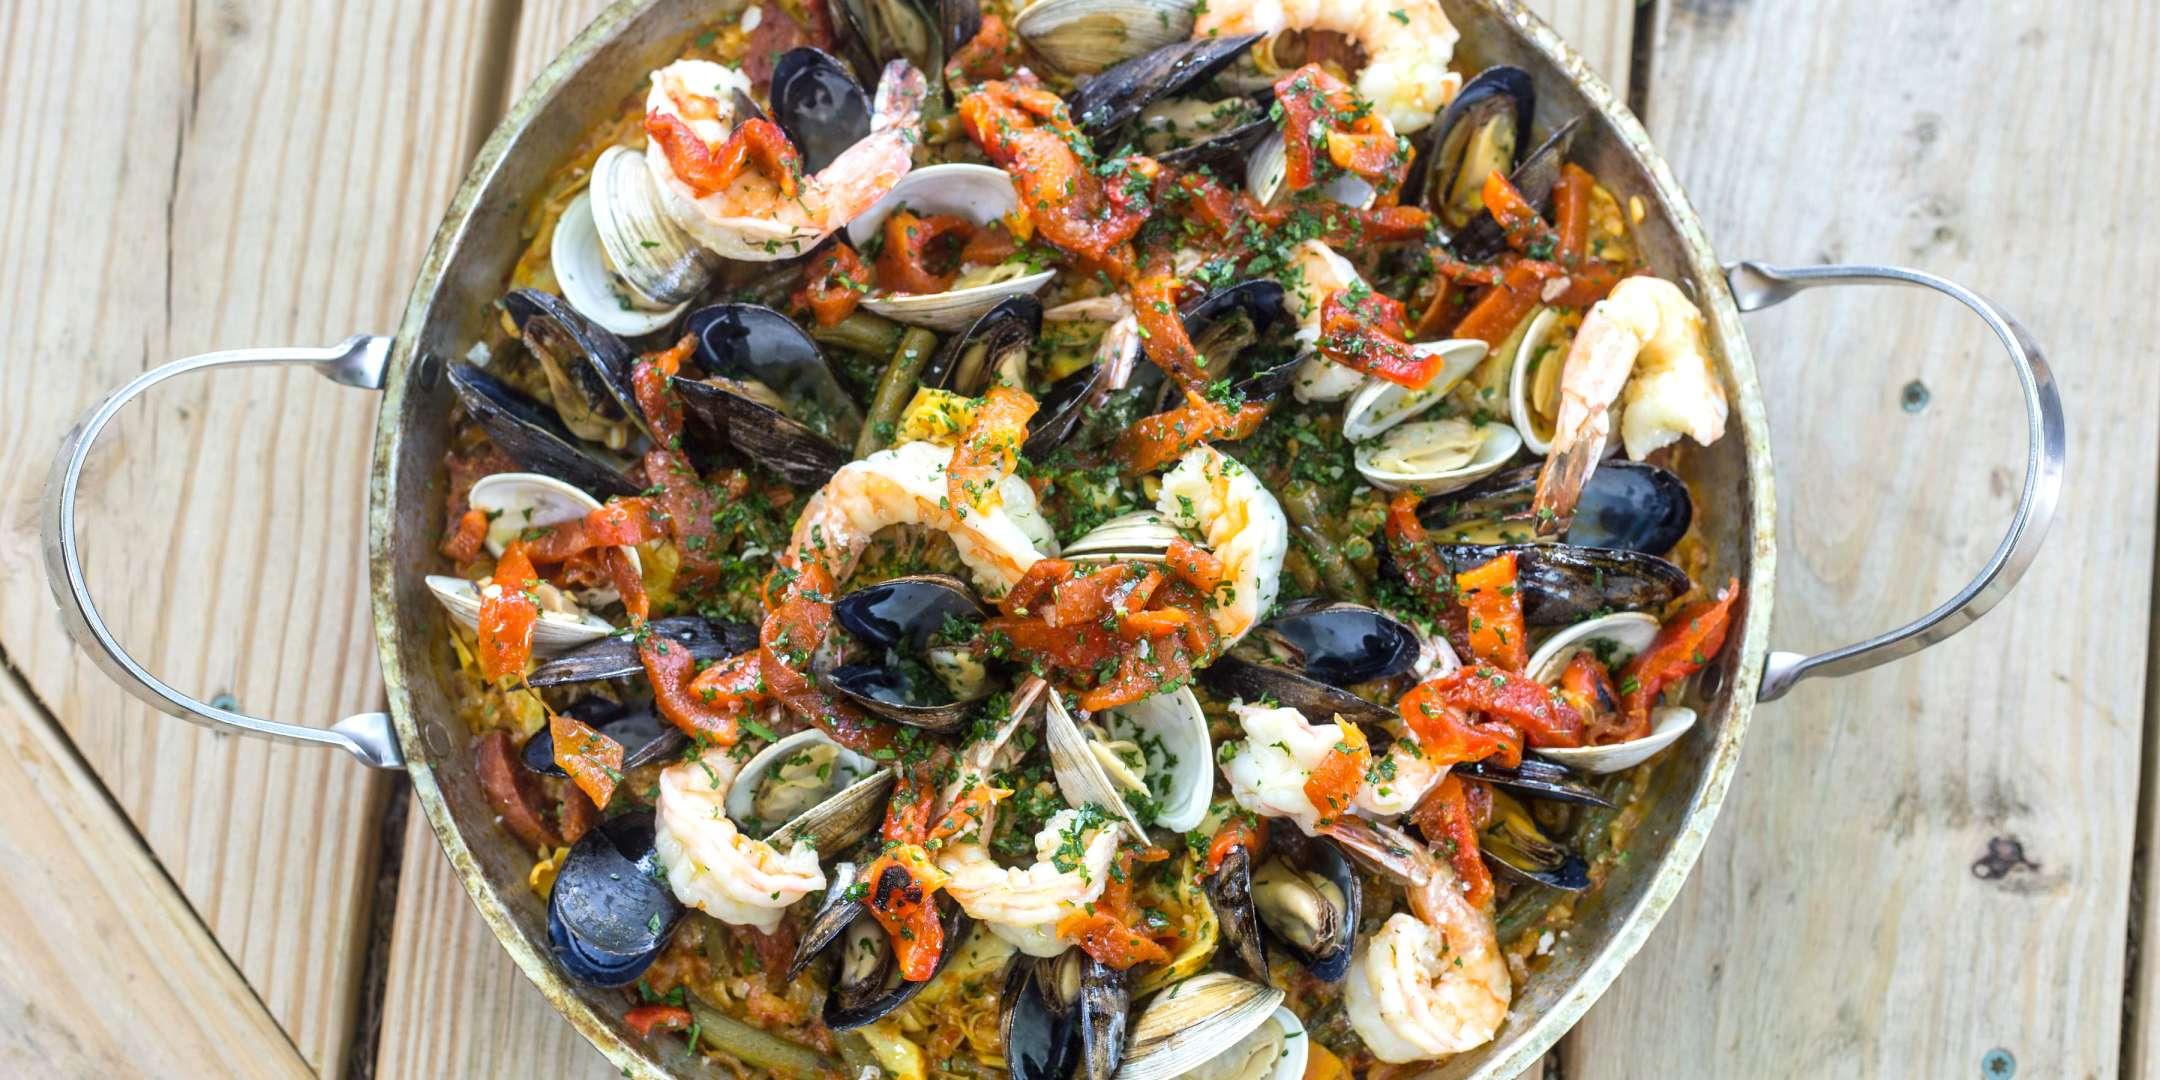 Seafood Paella Workshop - Cooking Class by Cozymeal™